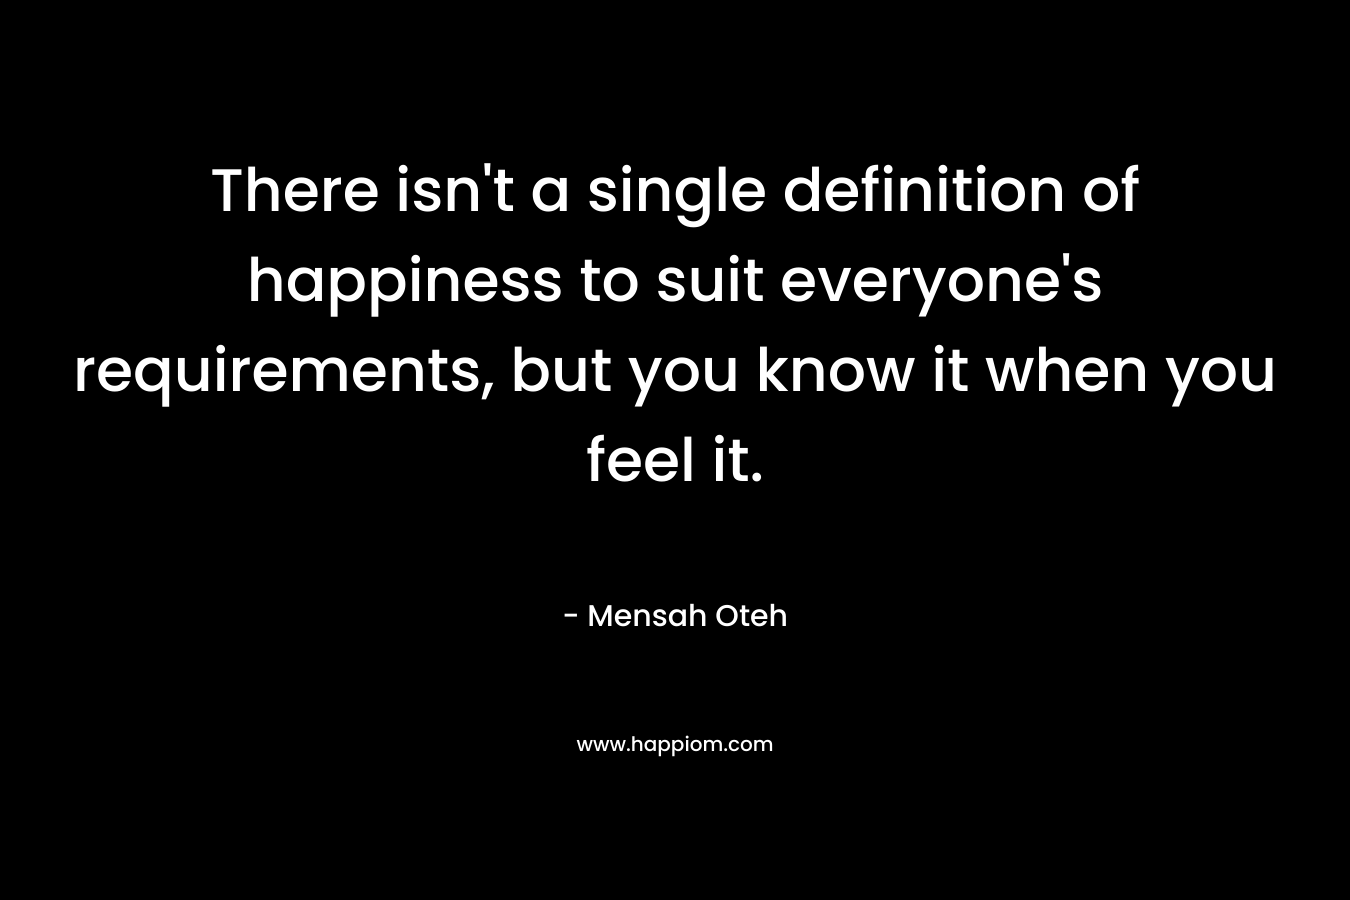 There isn't a single definition of happiness to suit everyone's requirements, but you know it when you feel it.